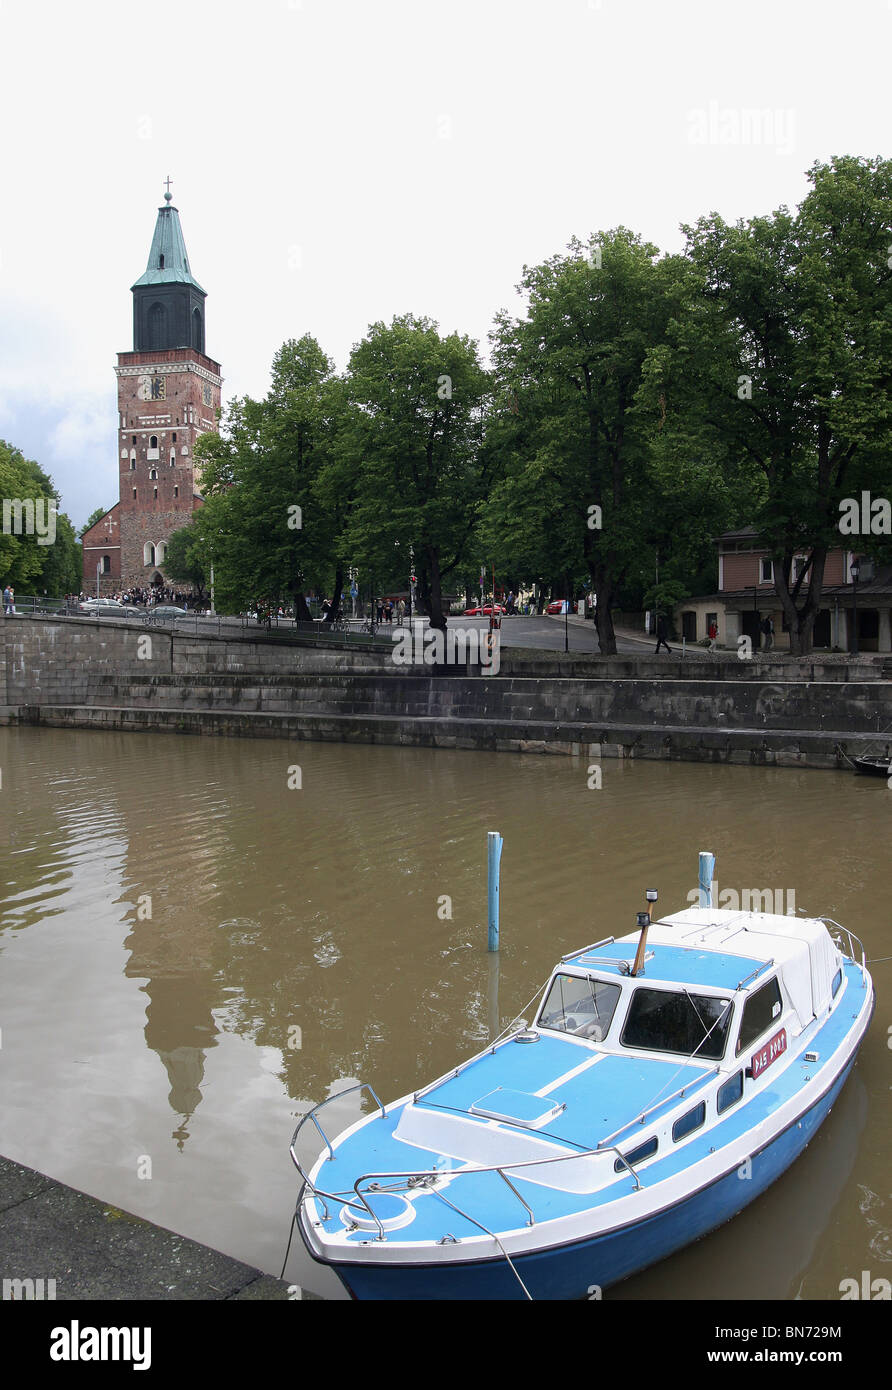 Boat on the River Aura, Turku, Finland with the Lutheran Cathedral in the background Stock Photo